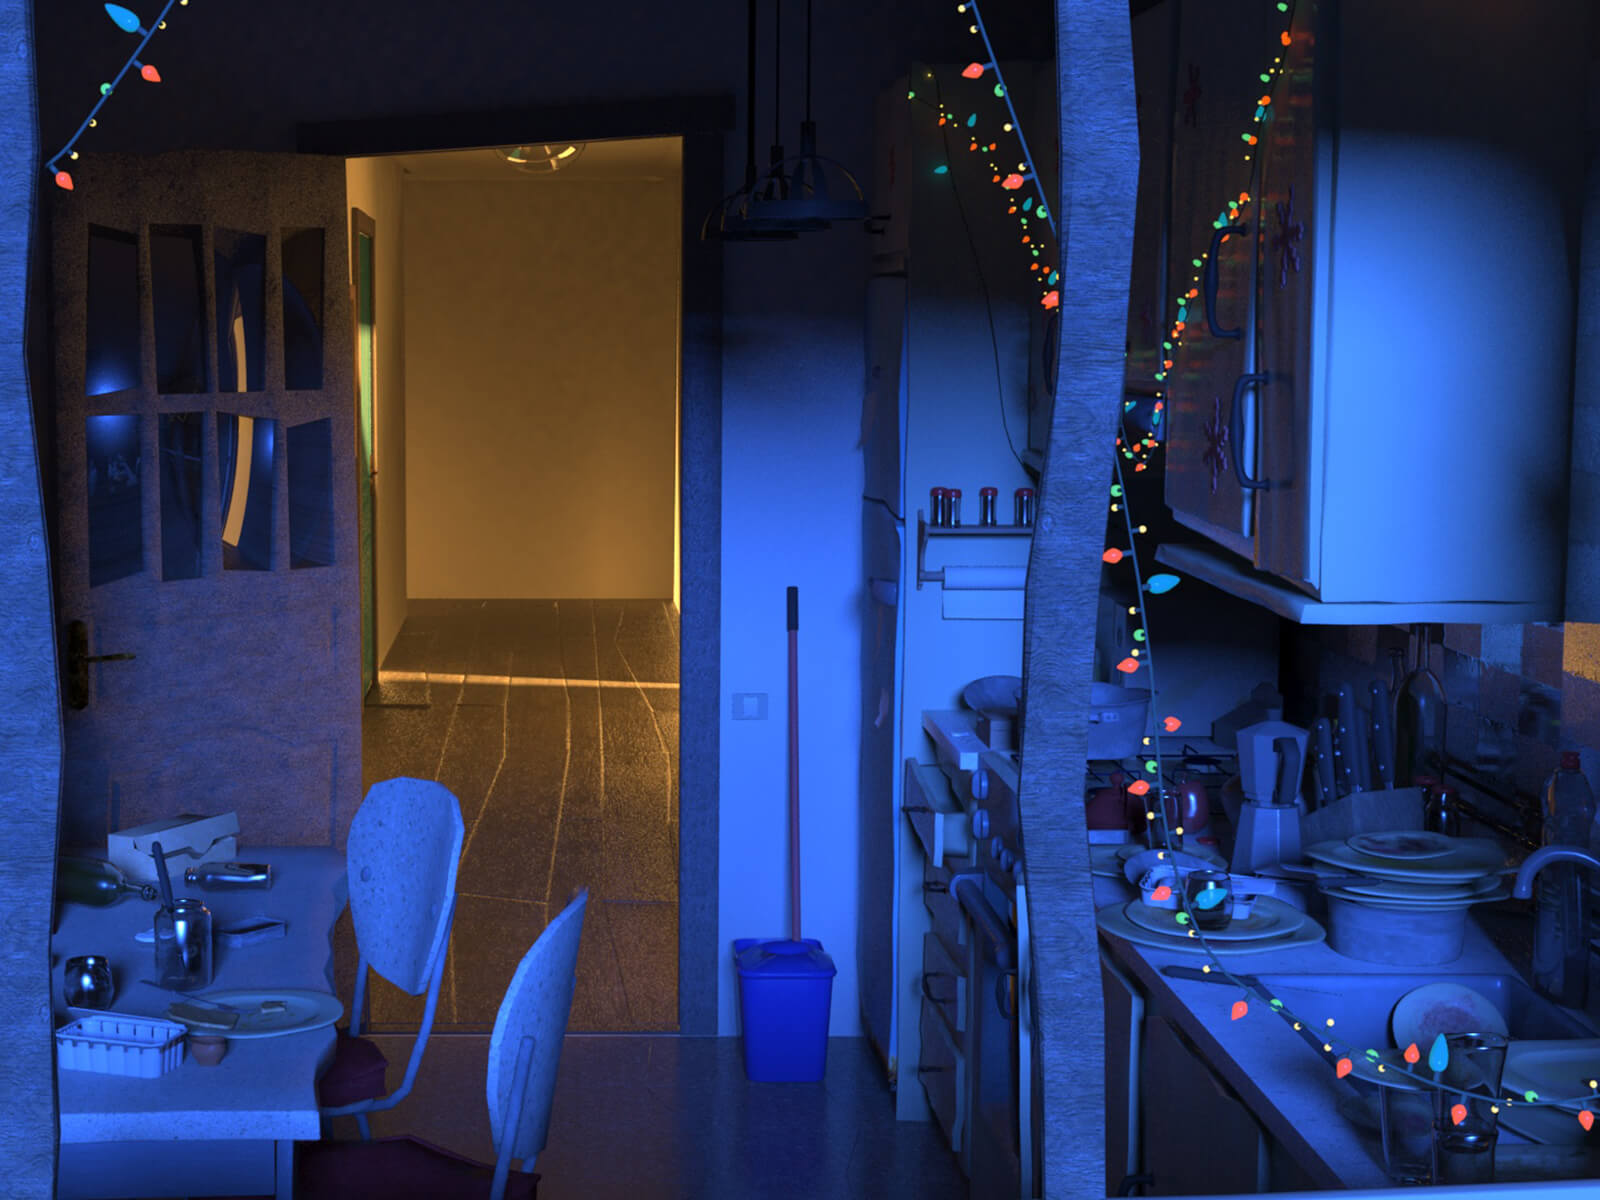 A darkened, messy kitchen decorated with festive lights. A door opened to a lit hallway is in the background.